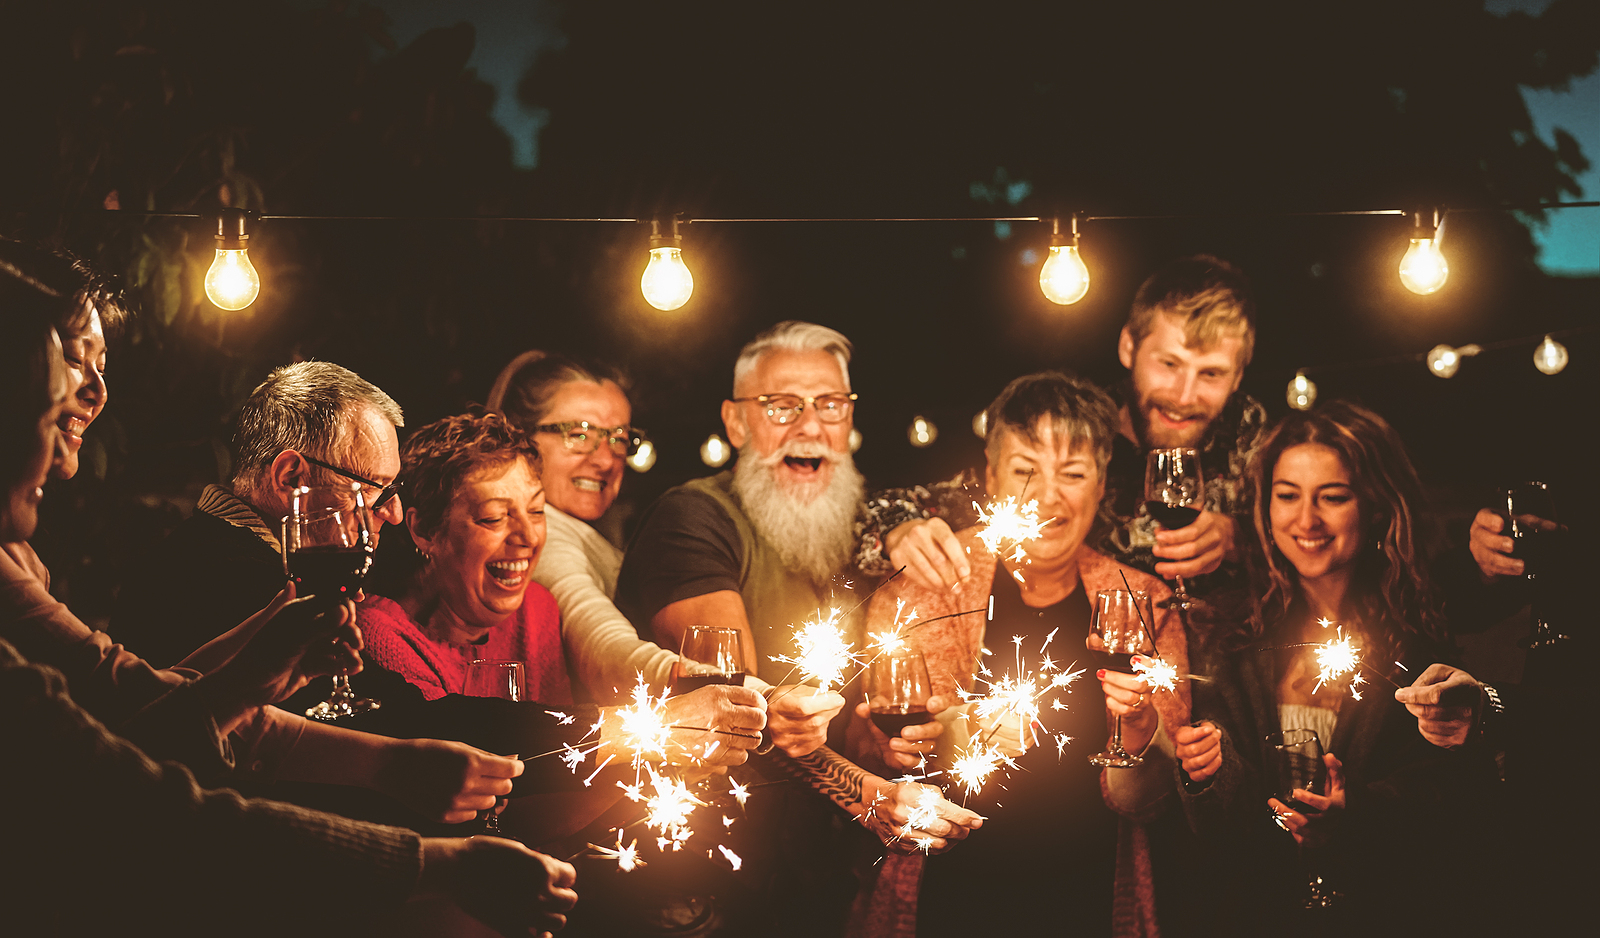 A large family of different ages laugh together holding sparklers during the night.